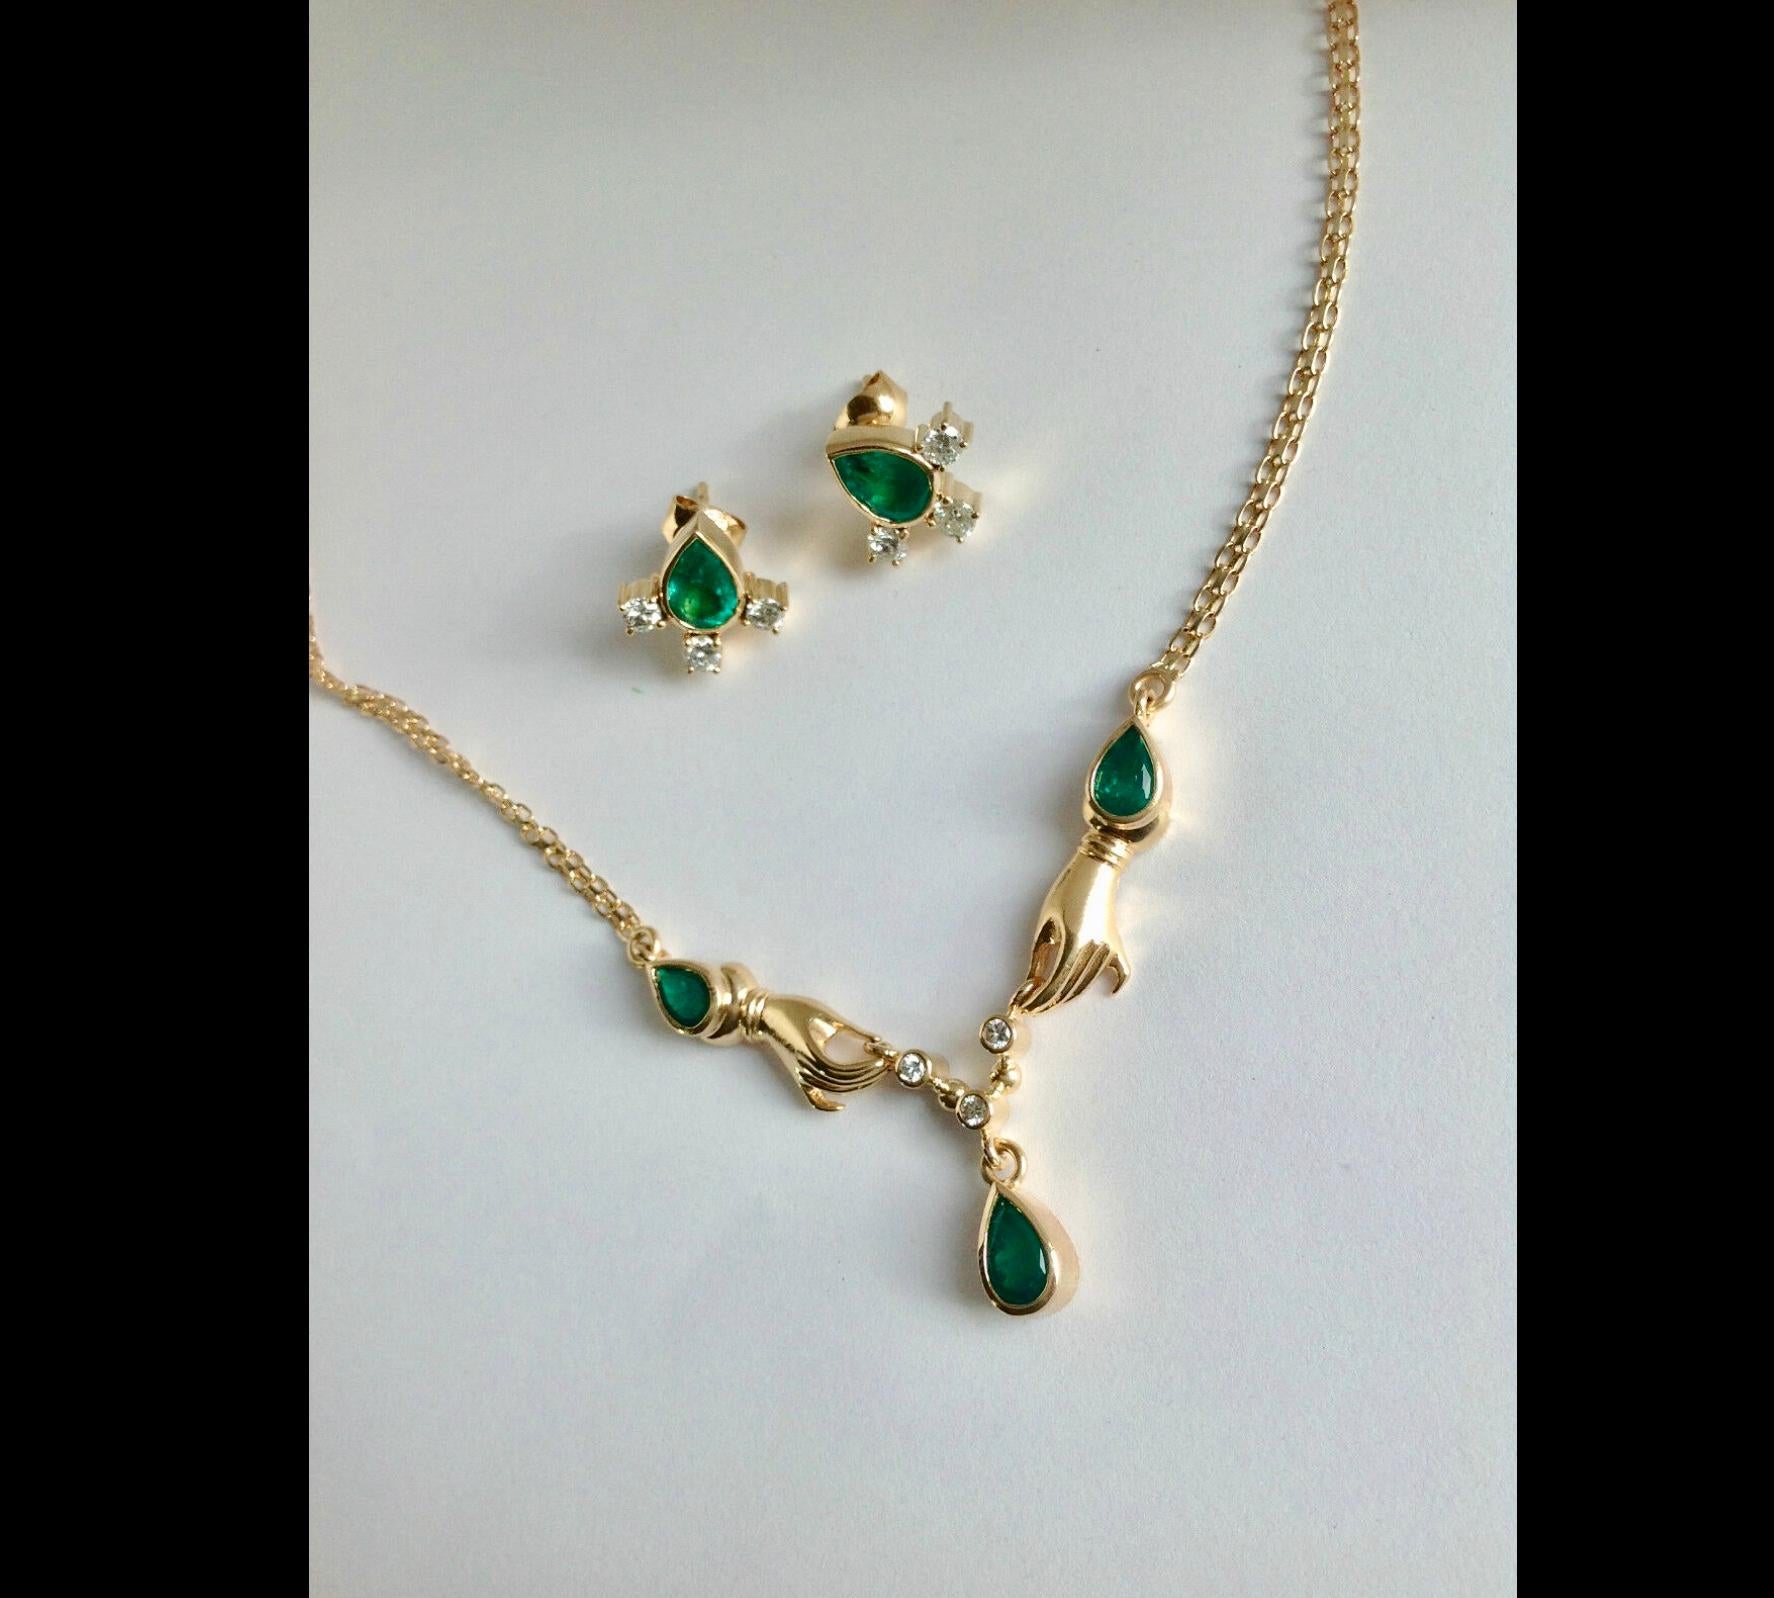 FINE COLOMBIAN EMERALD &  DIAMOND LADY HANDS PENDANT NECKLACE
Fine Quality Colombian emeralds and diamonds. This Incredible Hands AAA emerald and diamond necklace is custom-made solid 18k yellow gold. The necklace features three natural Colombian